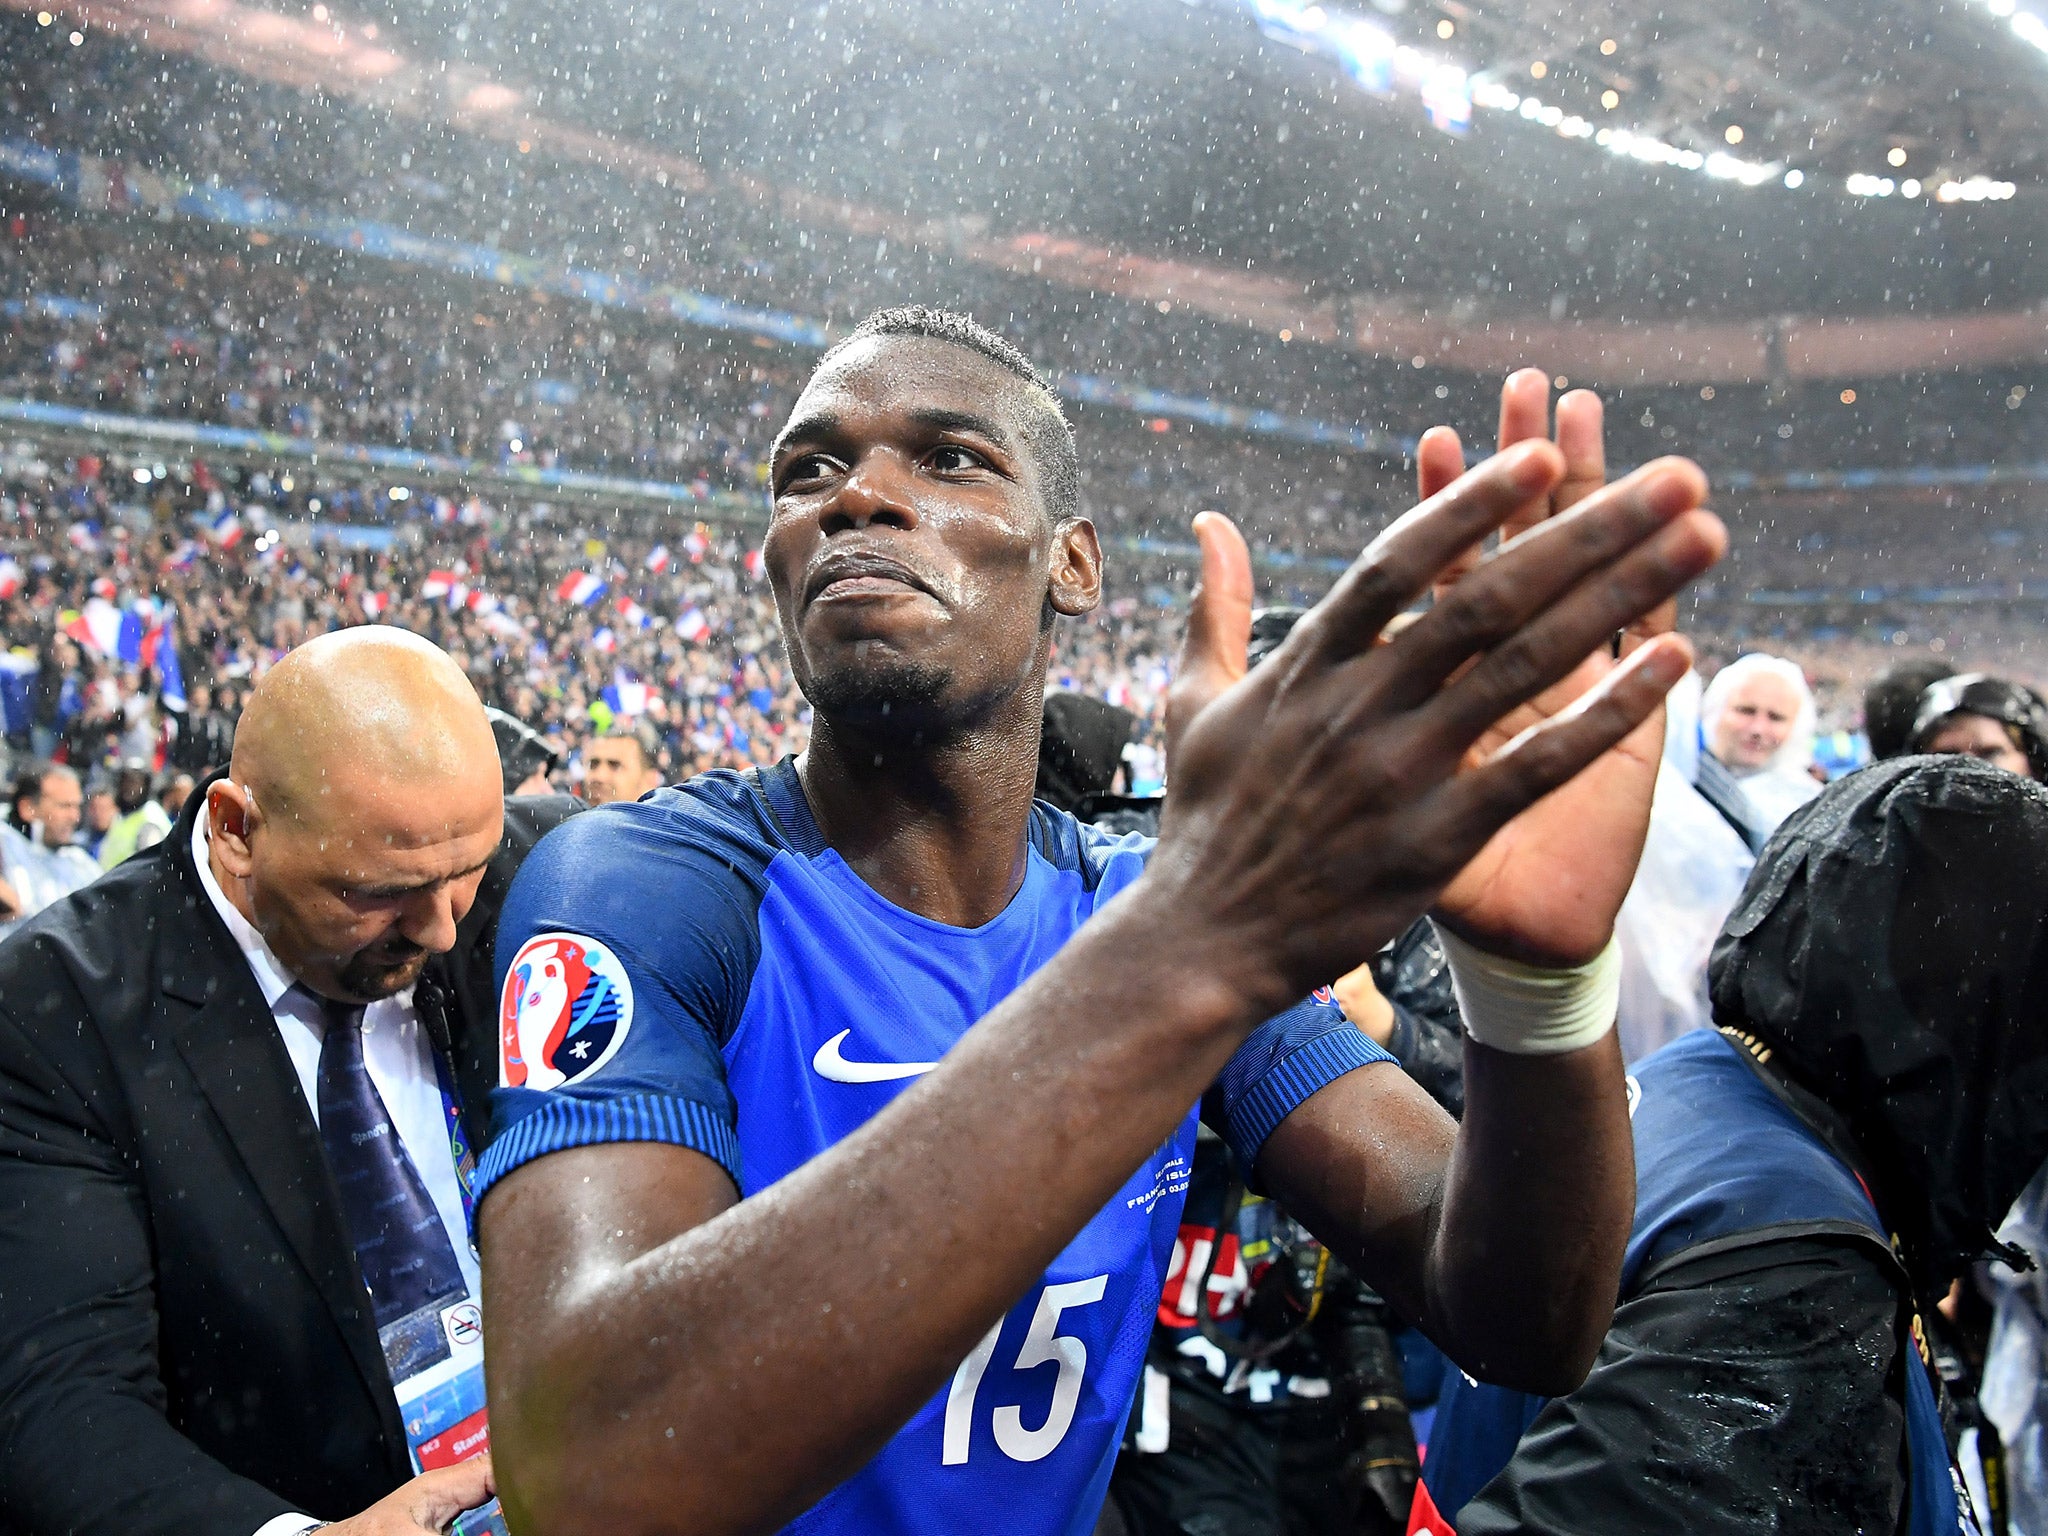 Paul Pogba could be the subject of a world record £100m transfer bid from Manchester United